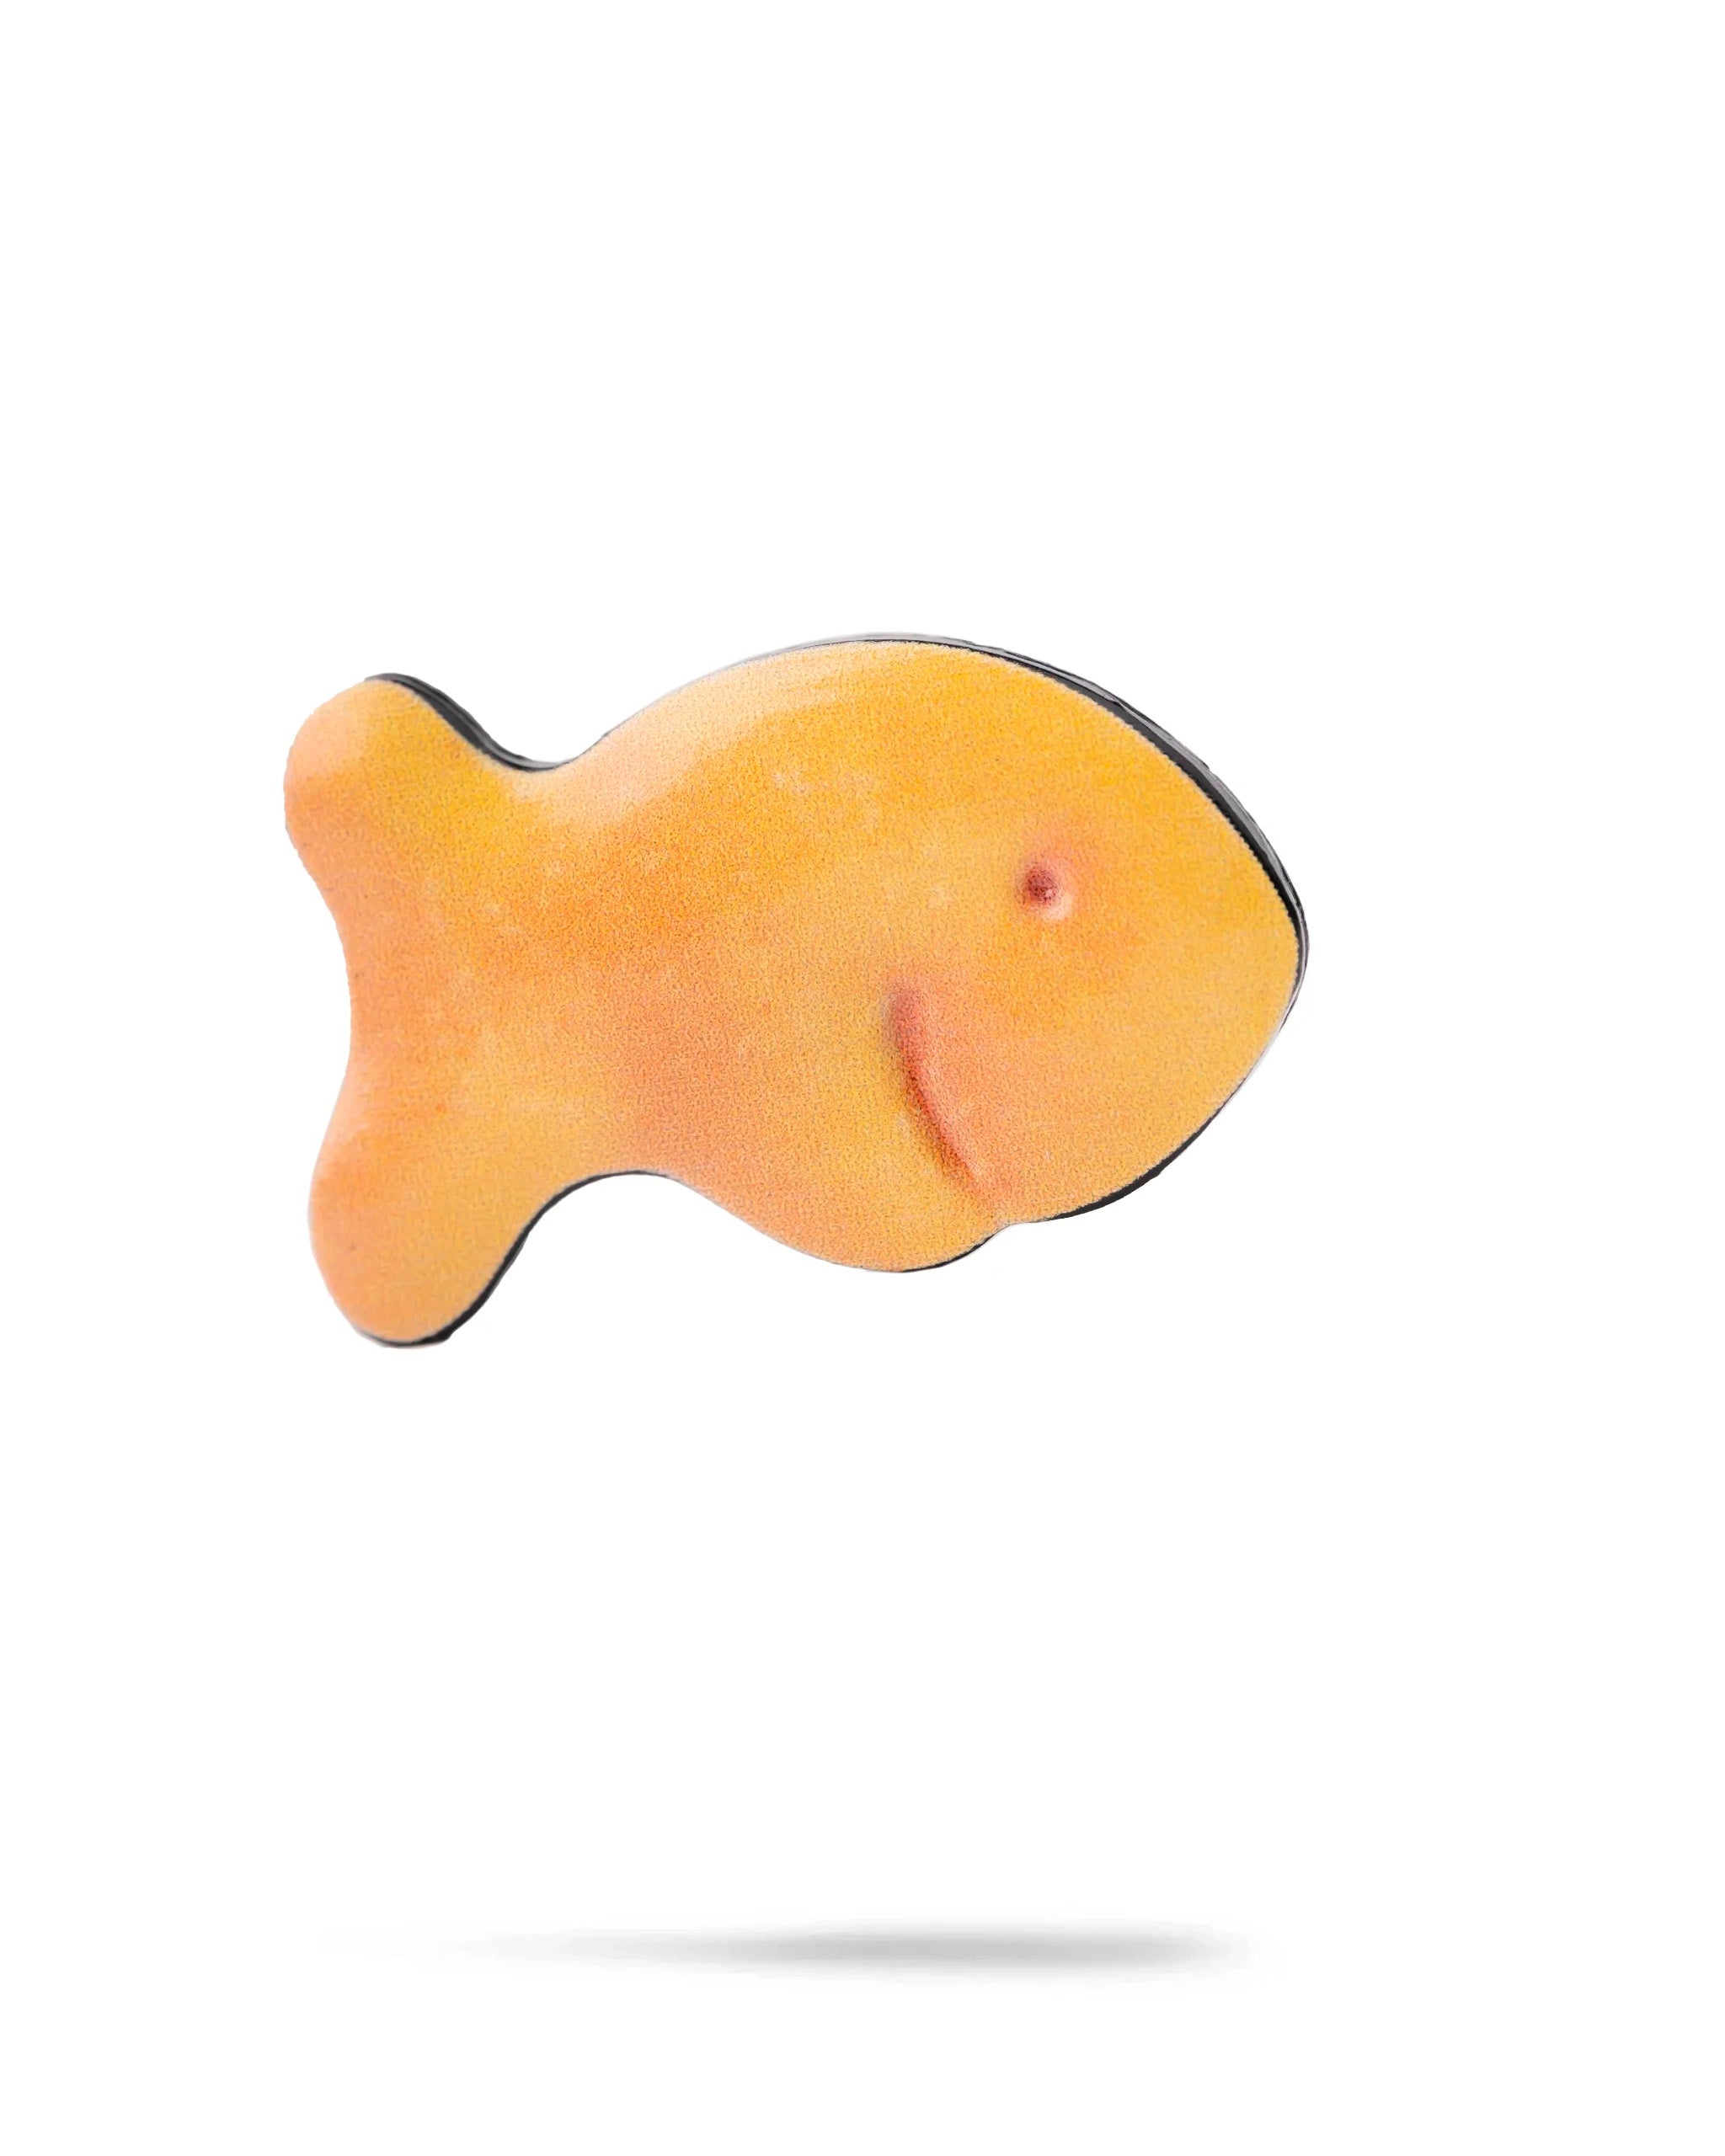 opponent clipart fish